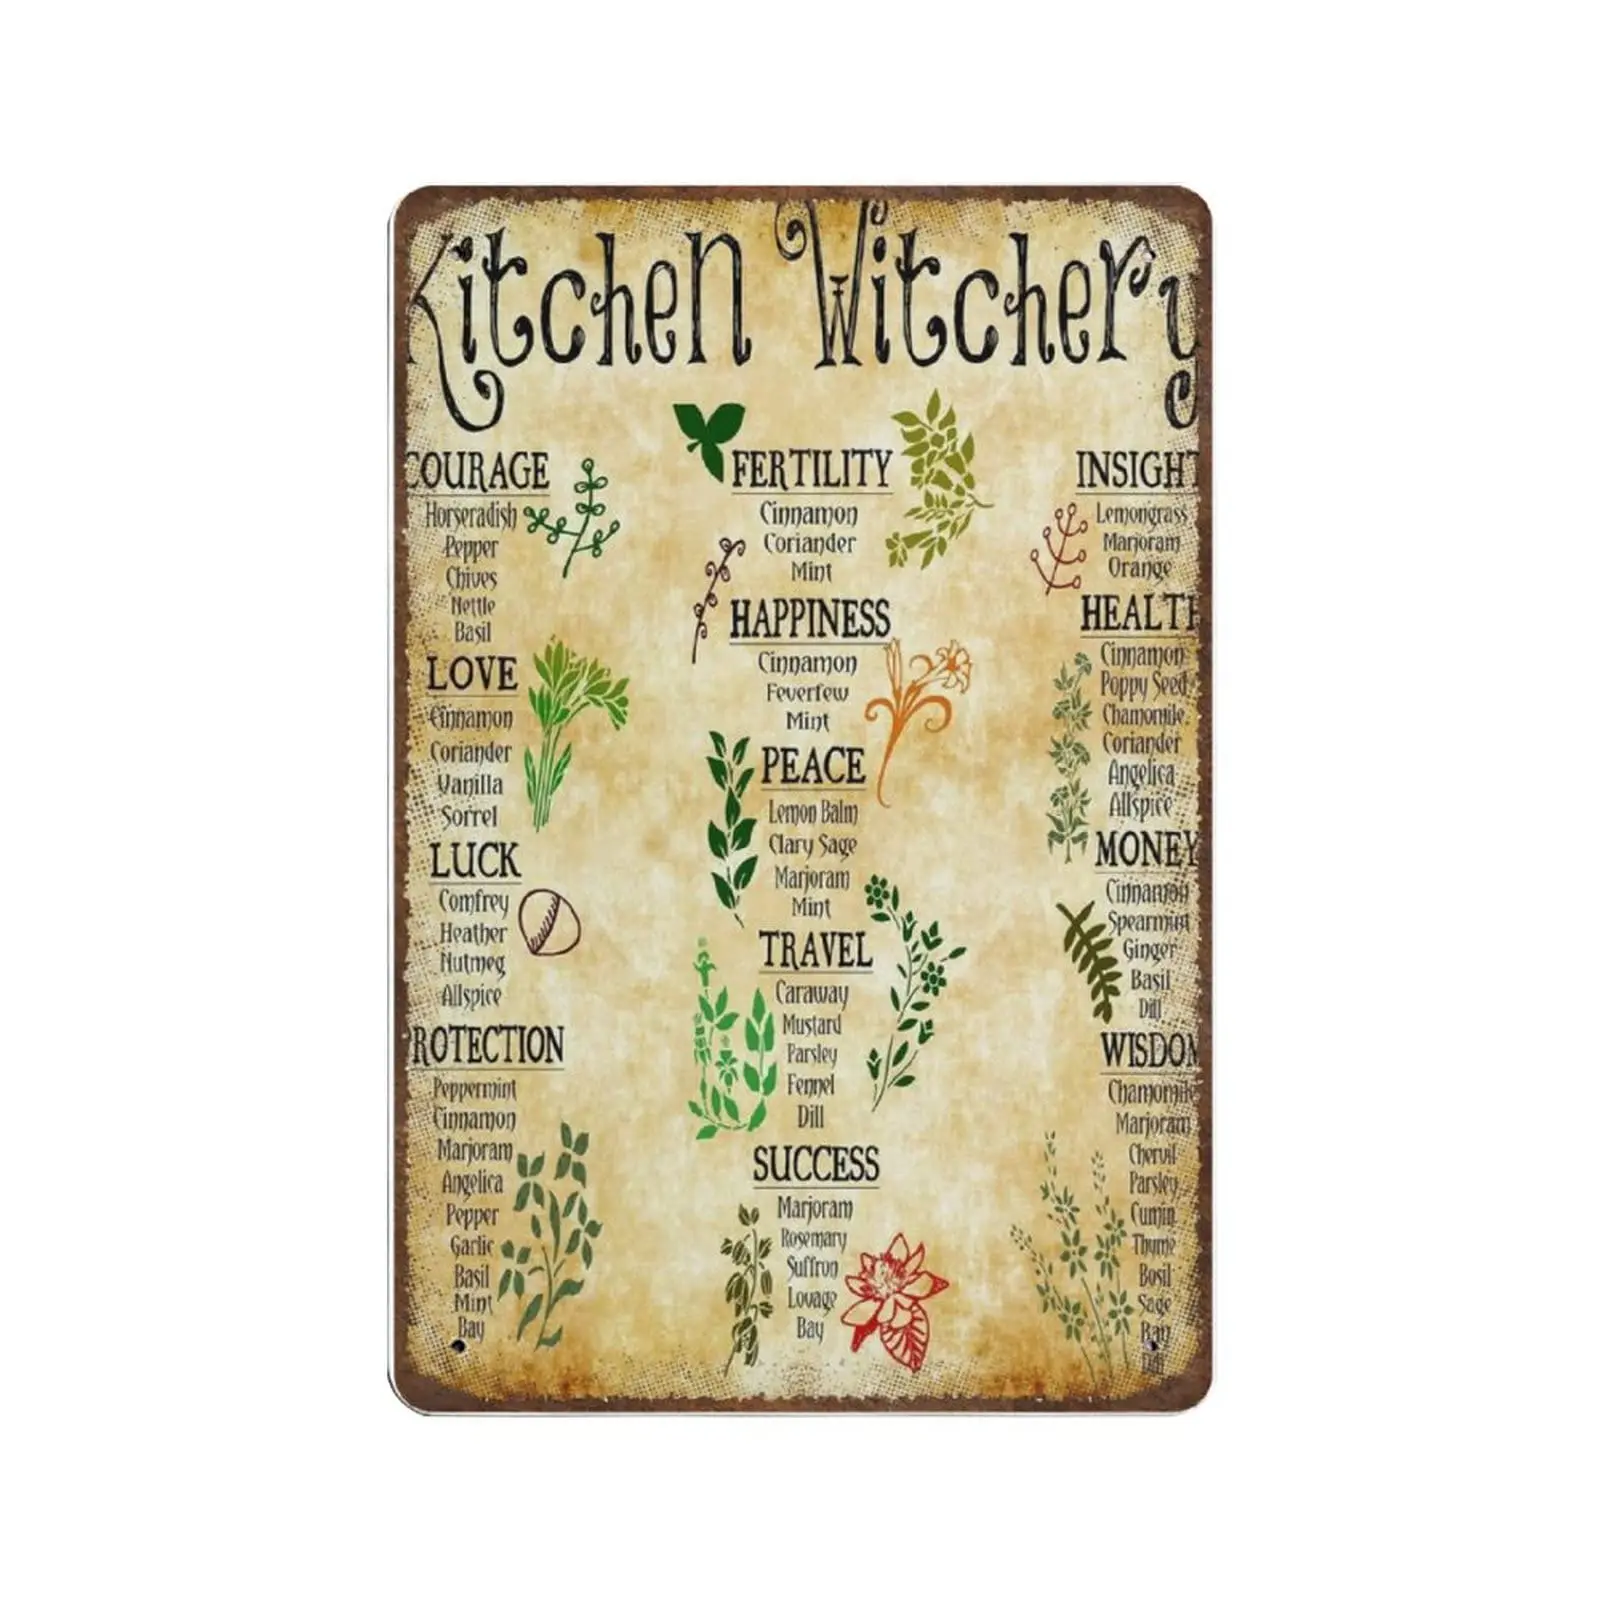 

Retro Thick Metal Tin Sign- Witches Magic Knowledge Wall Art -Novelty Kitchen Witchery Posters，Home Decor Wall Art，Funny Signs f